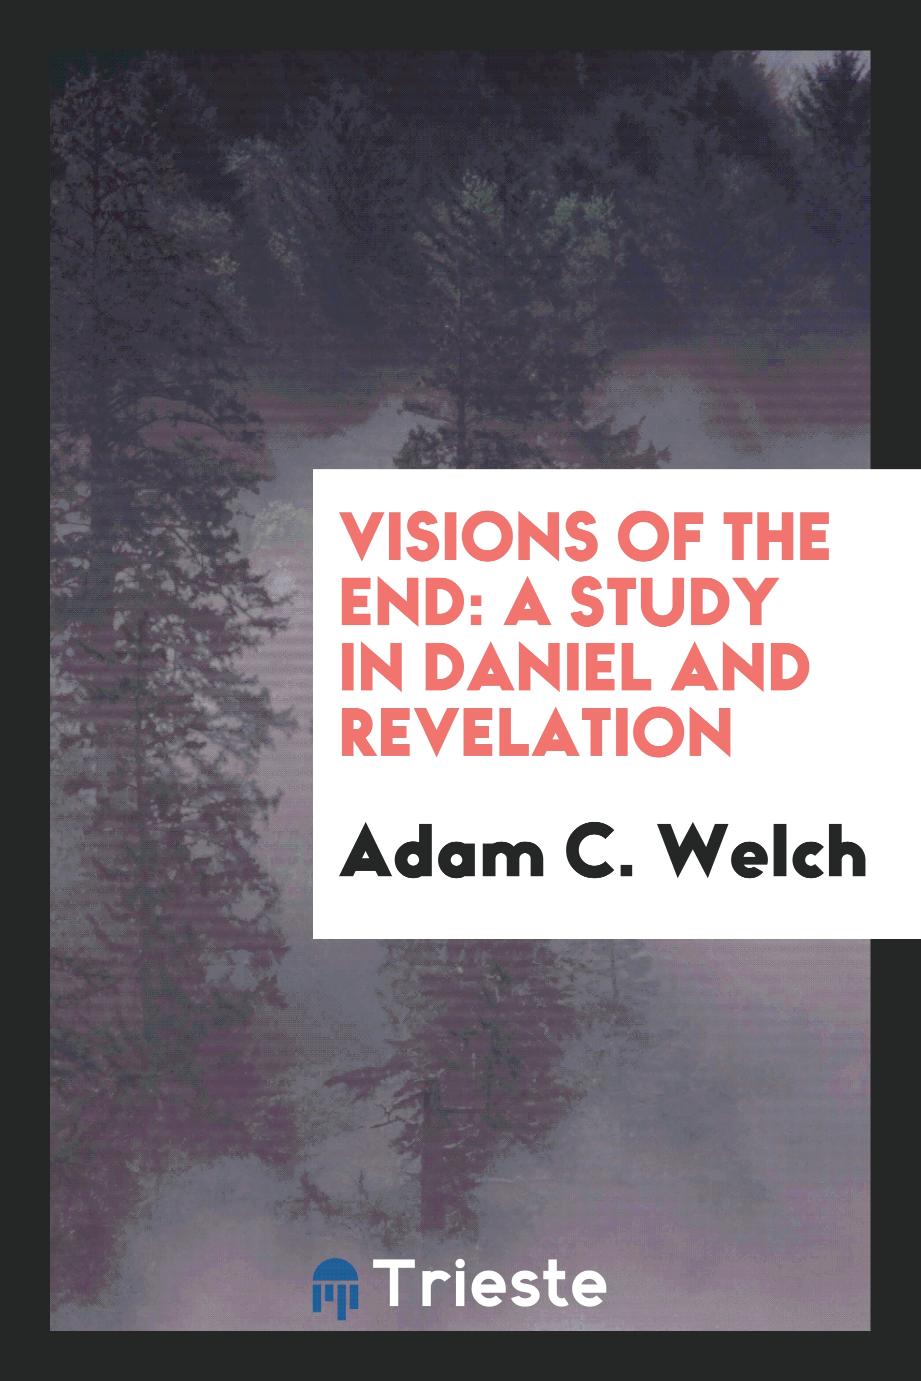 Visions of the end: a study in Daniel and Revelation